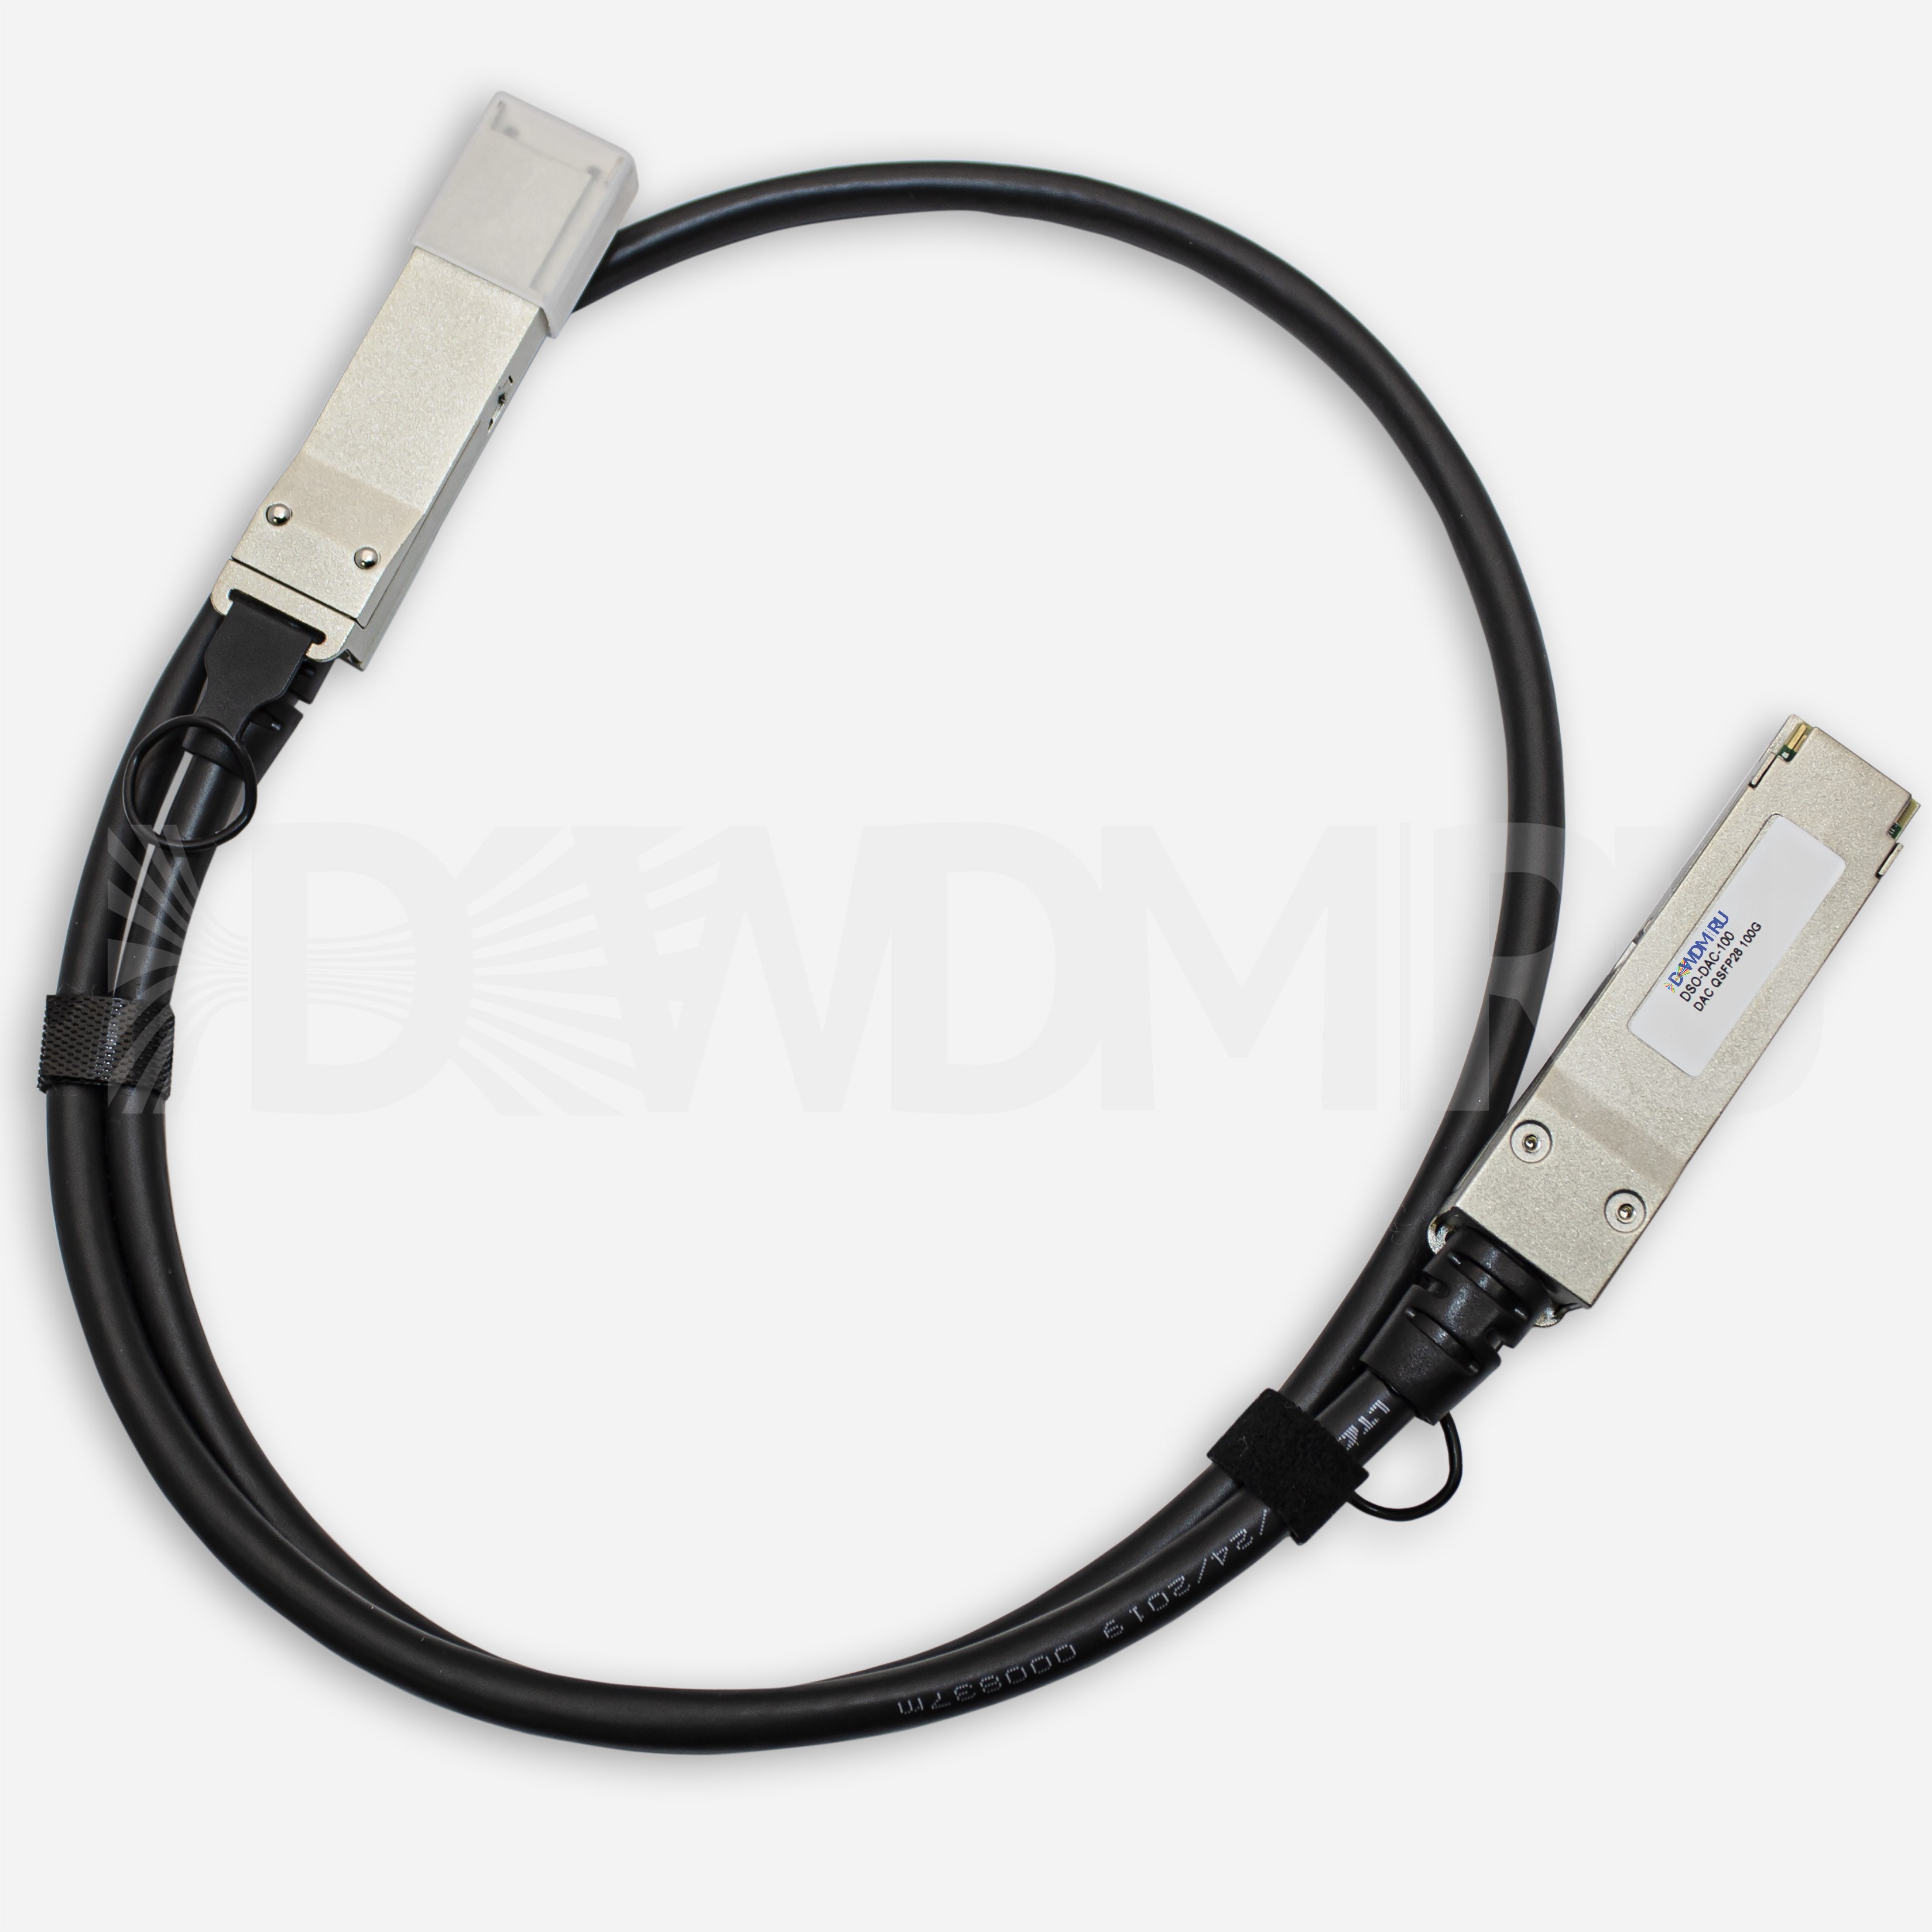 Кабель Direct Attached, QSFP28, 100 Гб/с, 1 м- ДВДМ.РУ (DSO-DAC-100-1)